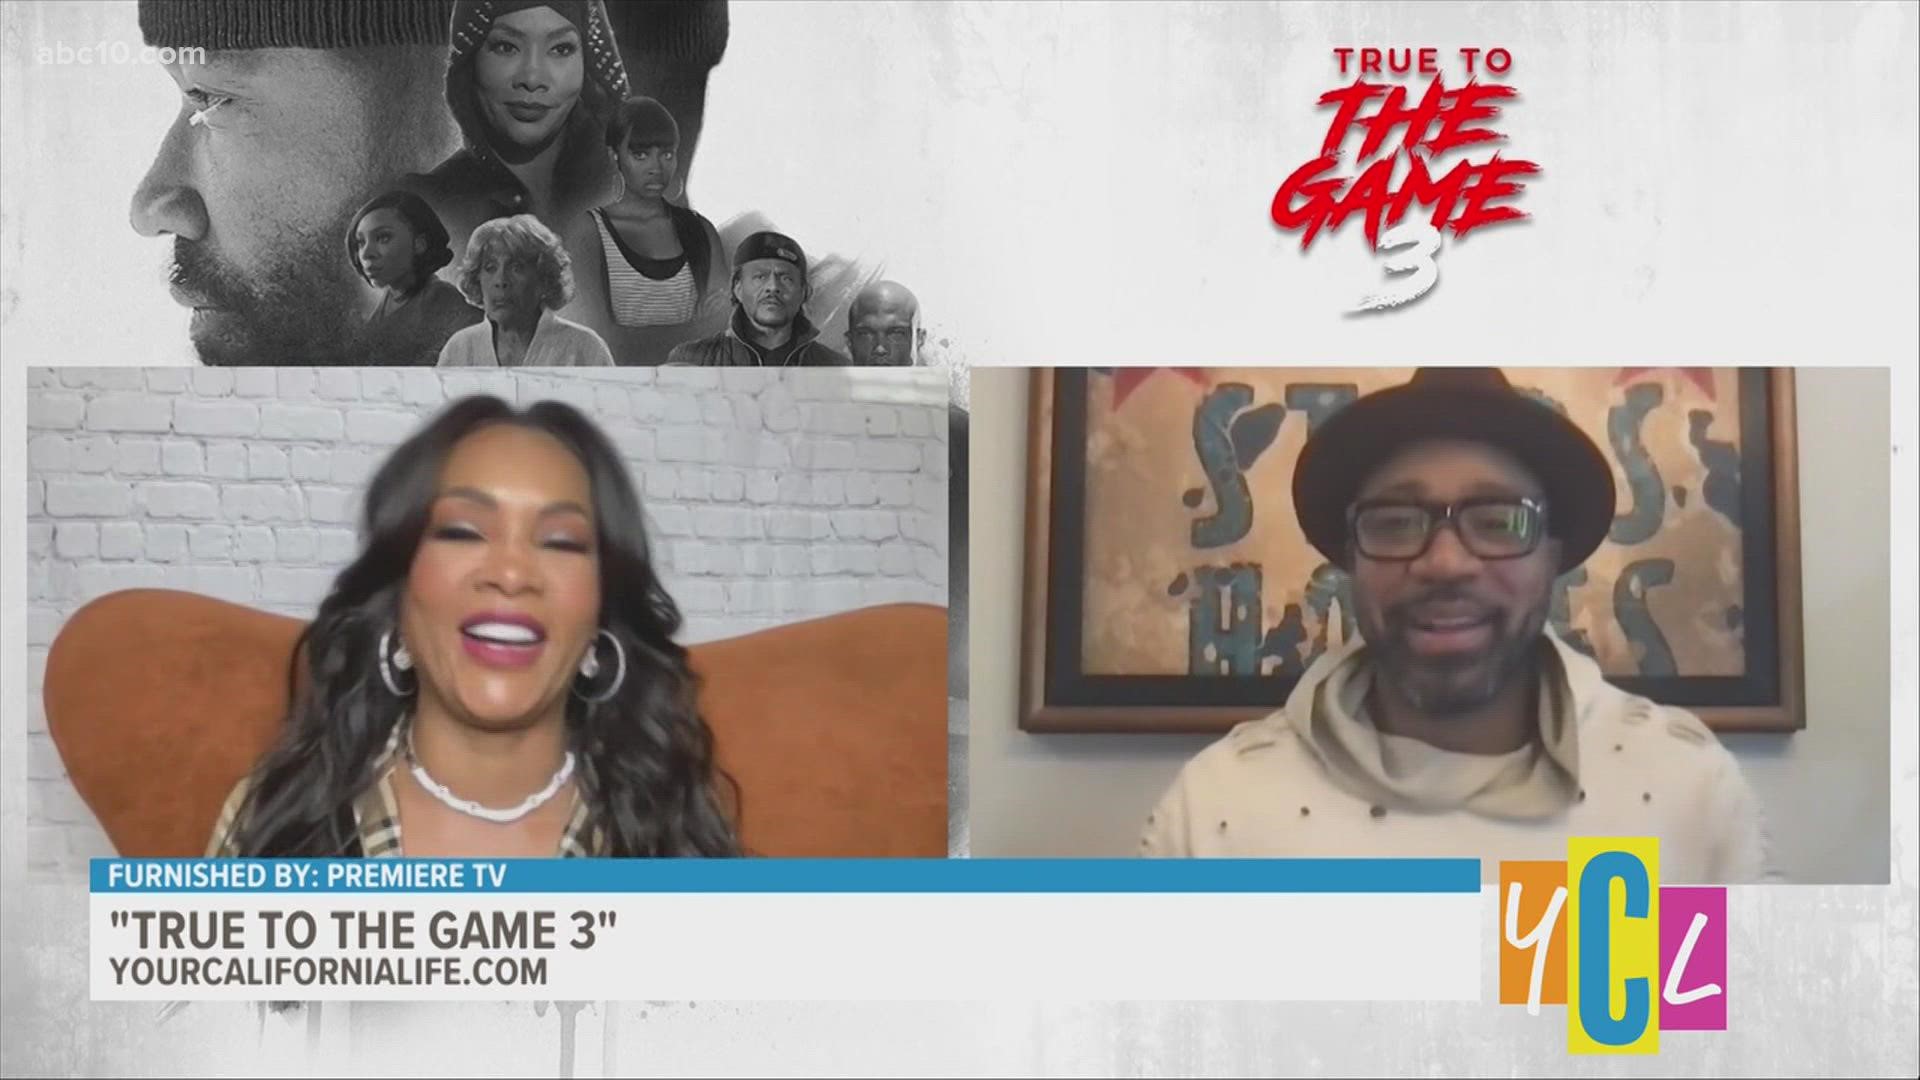 Vivica A. Fox and Columbus Short tell us about "True to the Game 3". See why they're calling the third movie a well-seasoned jambalaya to wrap up the trilogy.